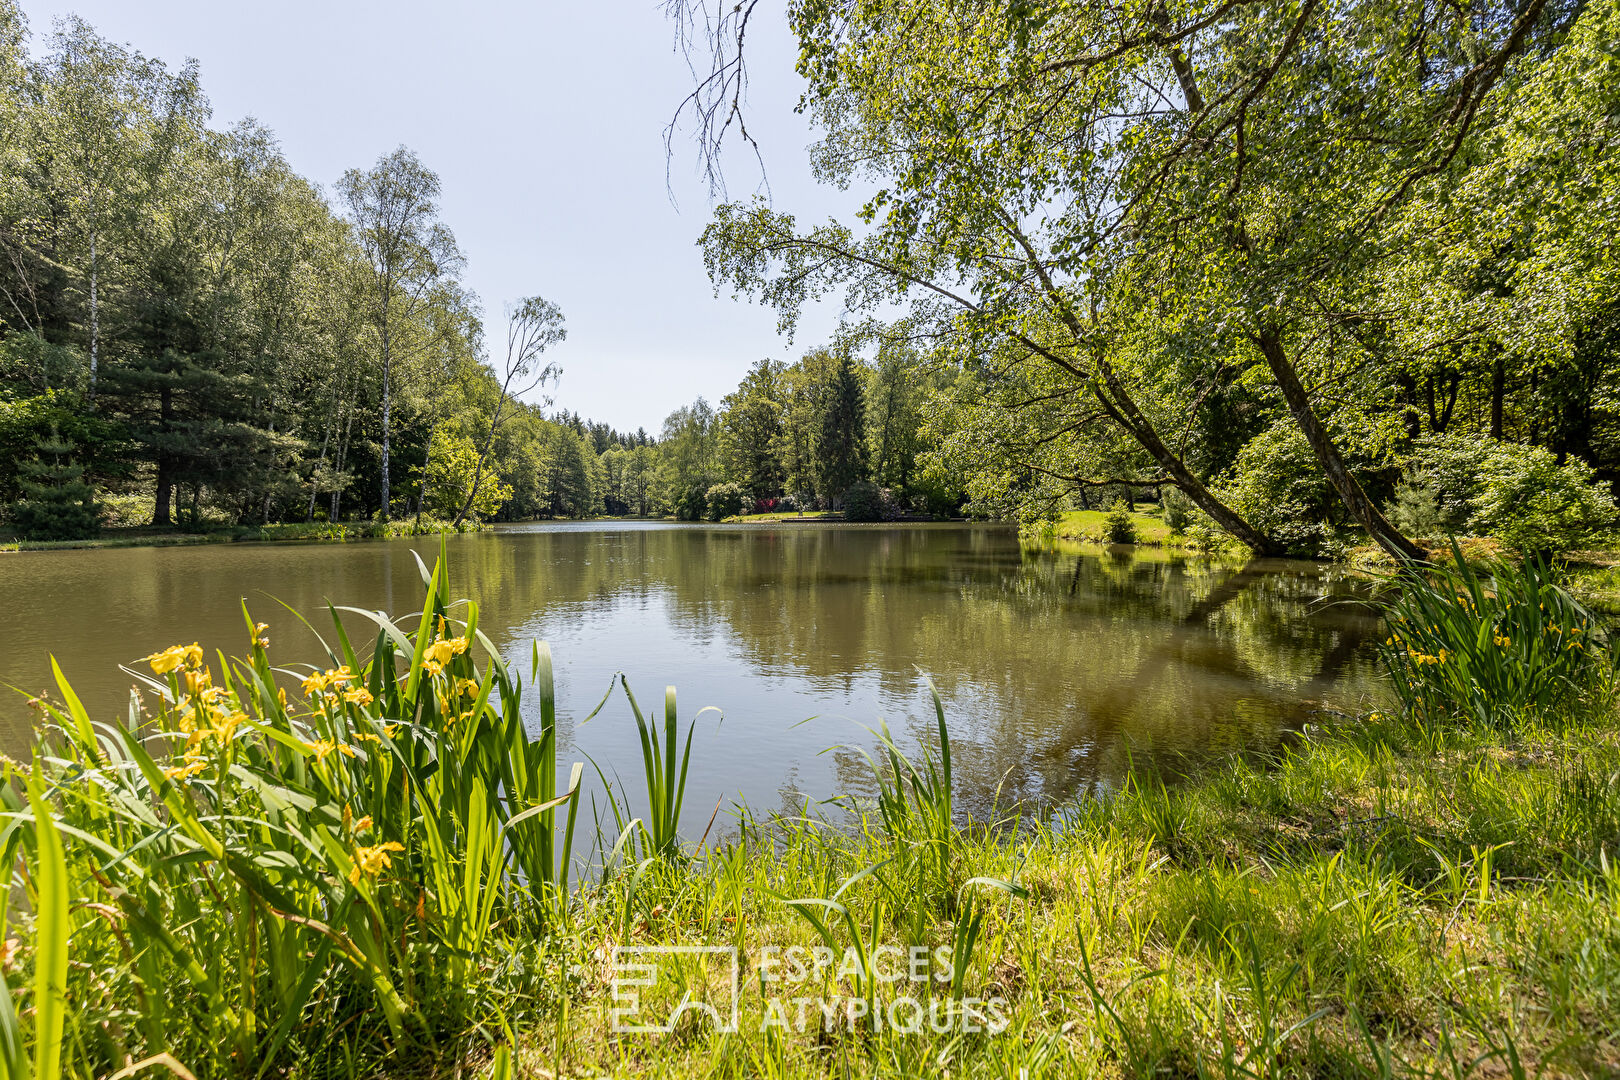 A haven of peace with a fishing pond in the middle of the forest